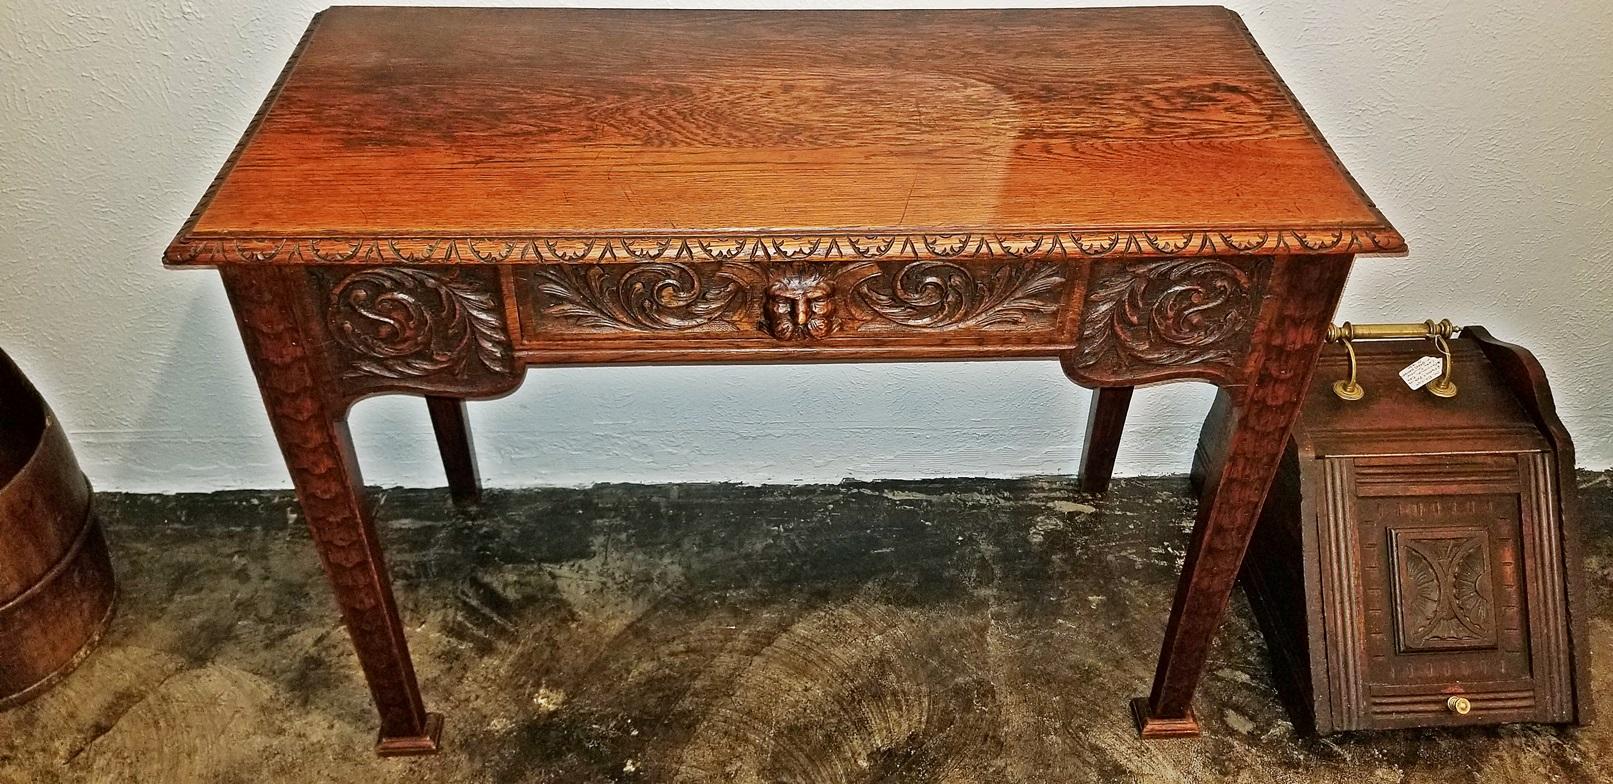 Lovely French Provincial oak side or console table from circa 1880.
Heavily carved with ‘Green Man’ Head on front drawer as central motif.
Probably made in Northern France, in the Ardennes Region, it has a strong Germanic or Flemish